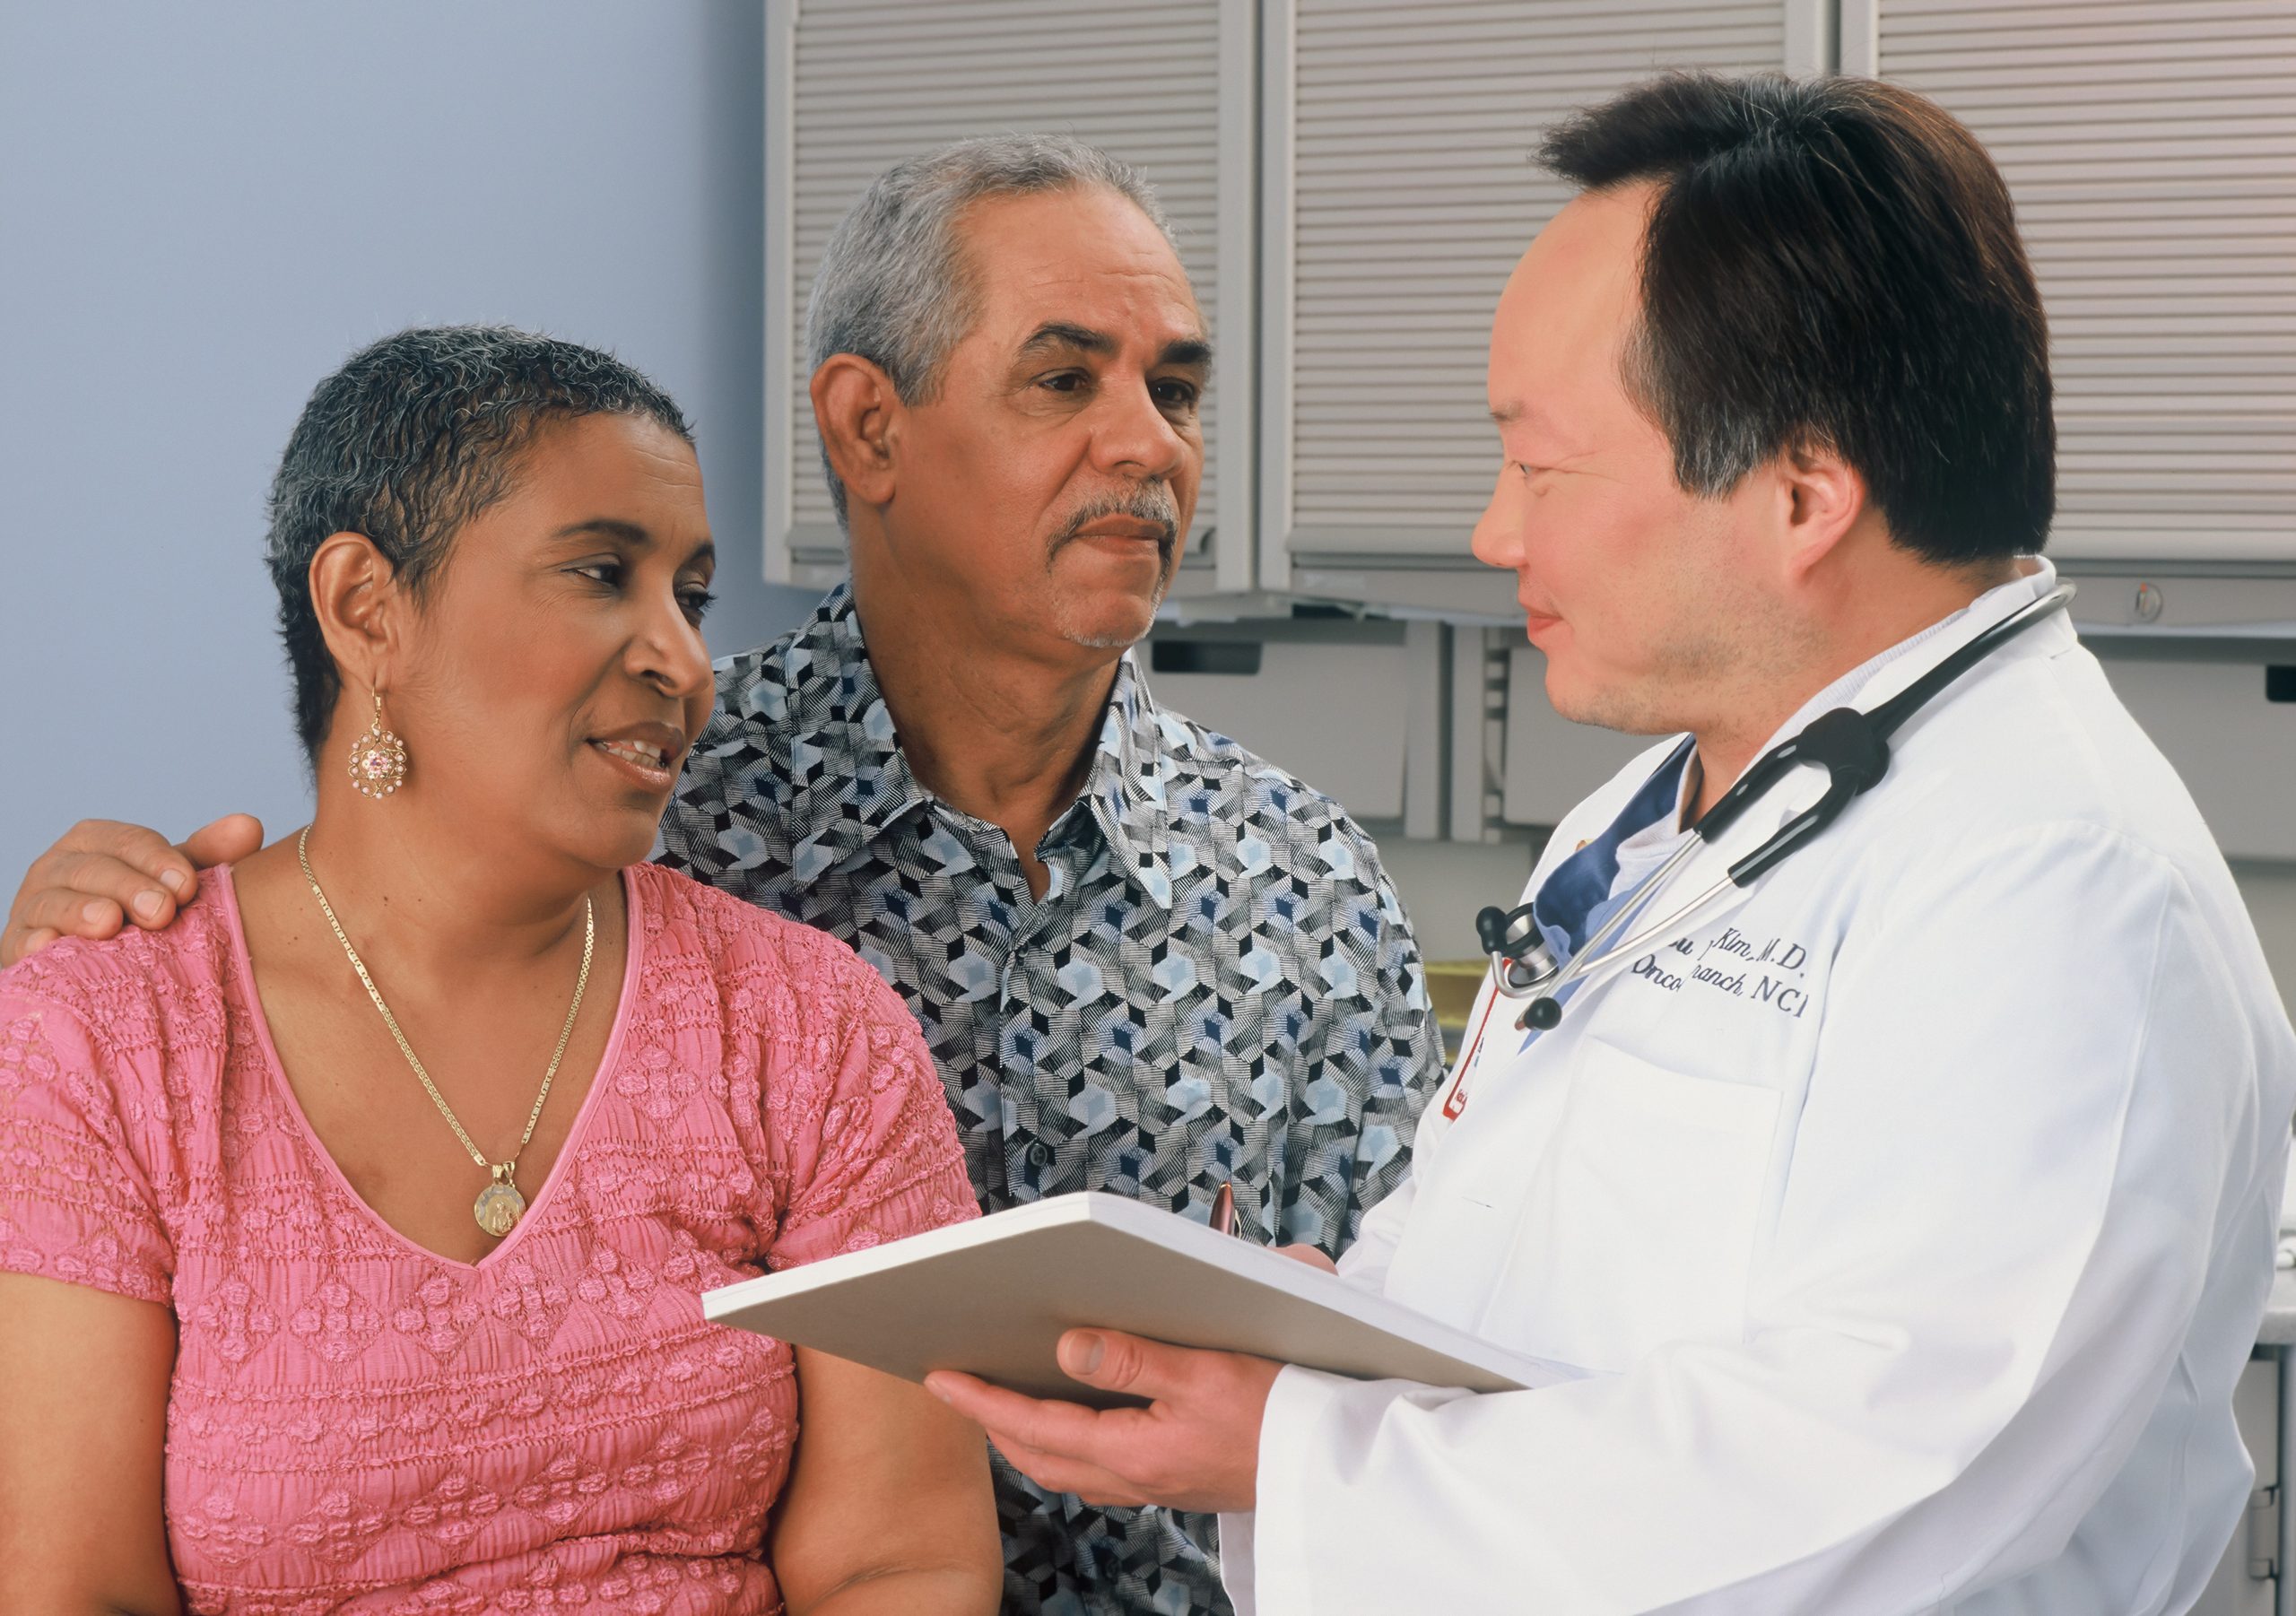 a doctor converses with a patient